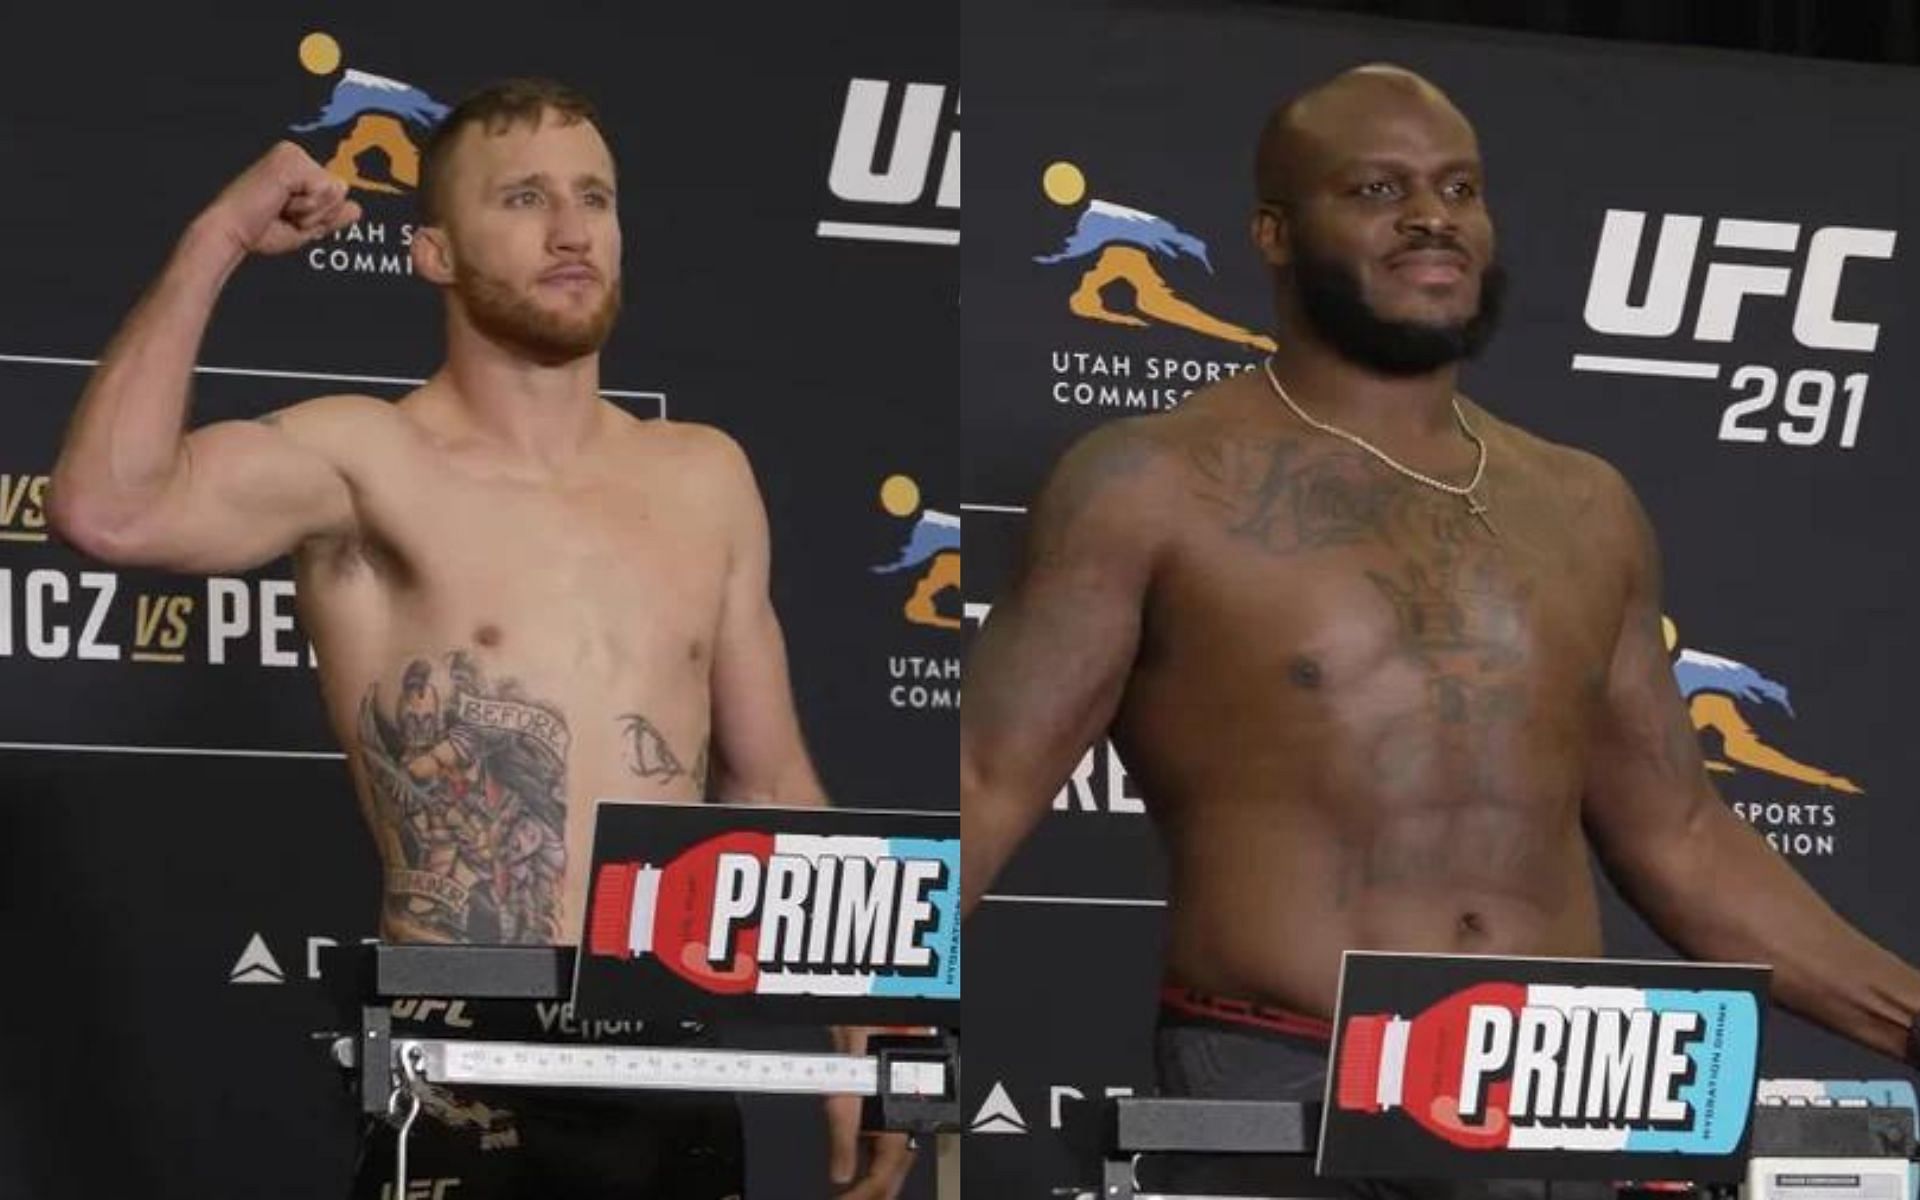 Justin Gaethje (left) and Derrick Lewis (right) (Image credits @MMAJunkie on Twitter)